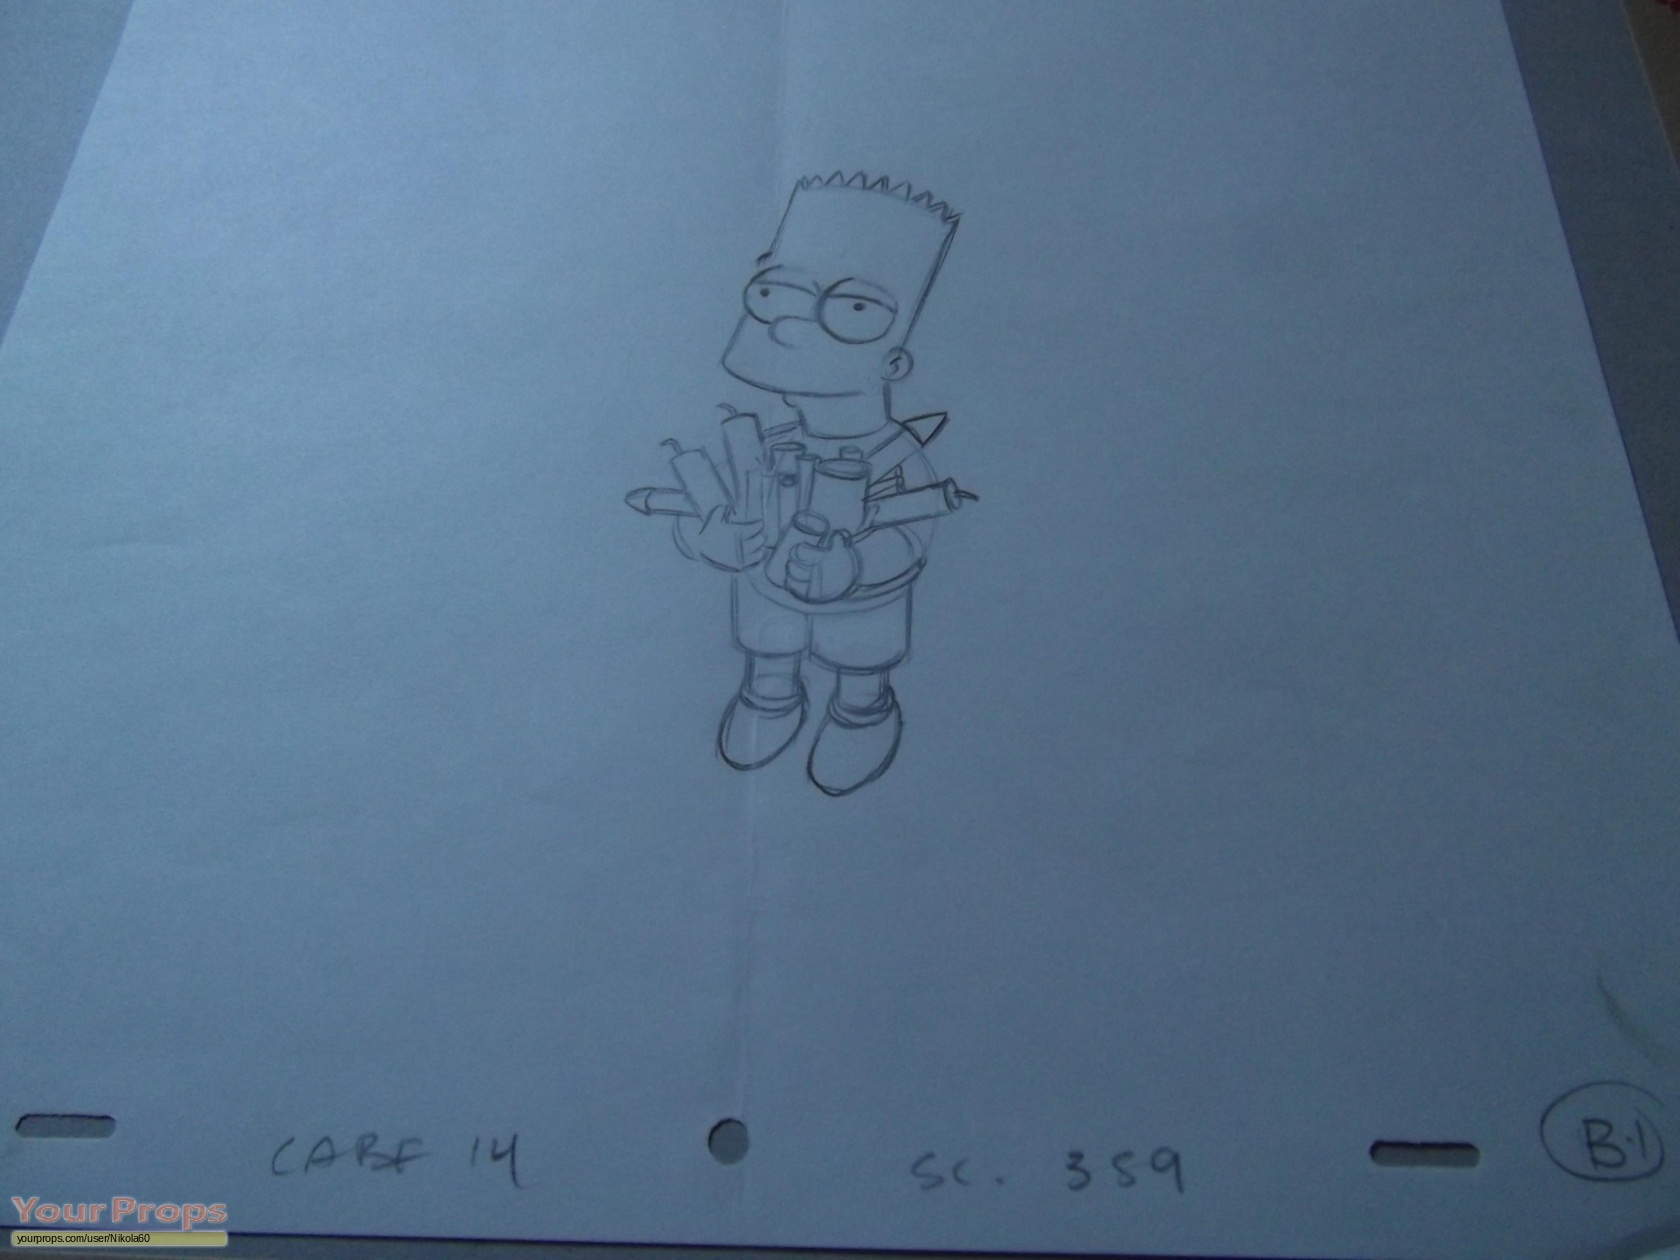 Collectables Collectible Animation Art & Merchandise The Simpsons Bart  Simpson Close-Up Original Production Drawing Animation Art UF 